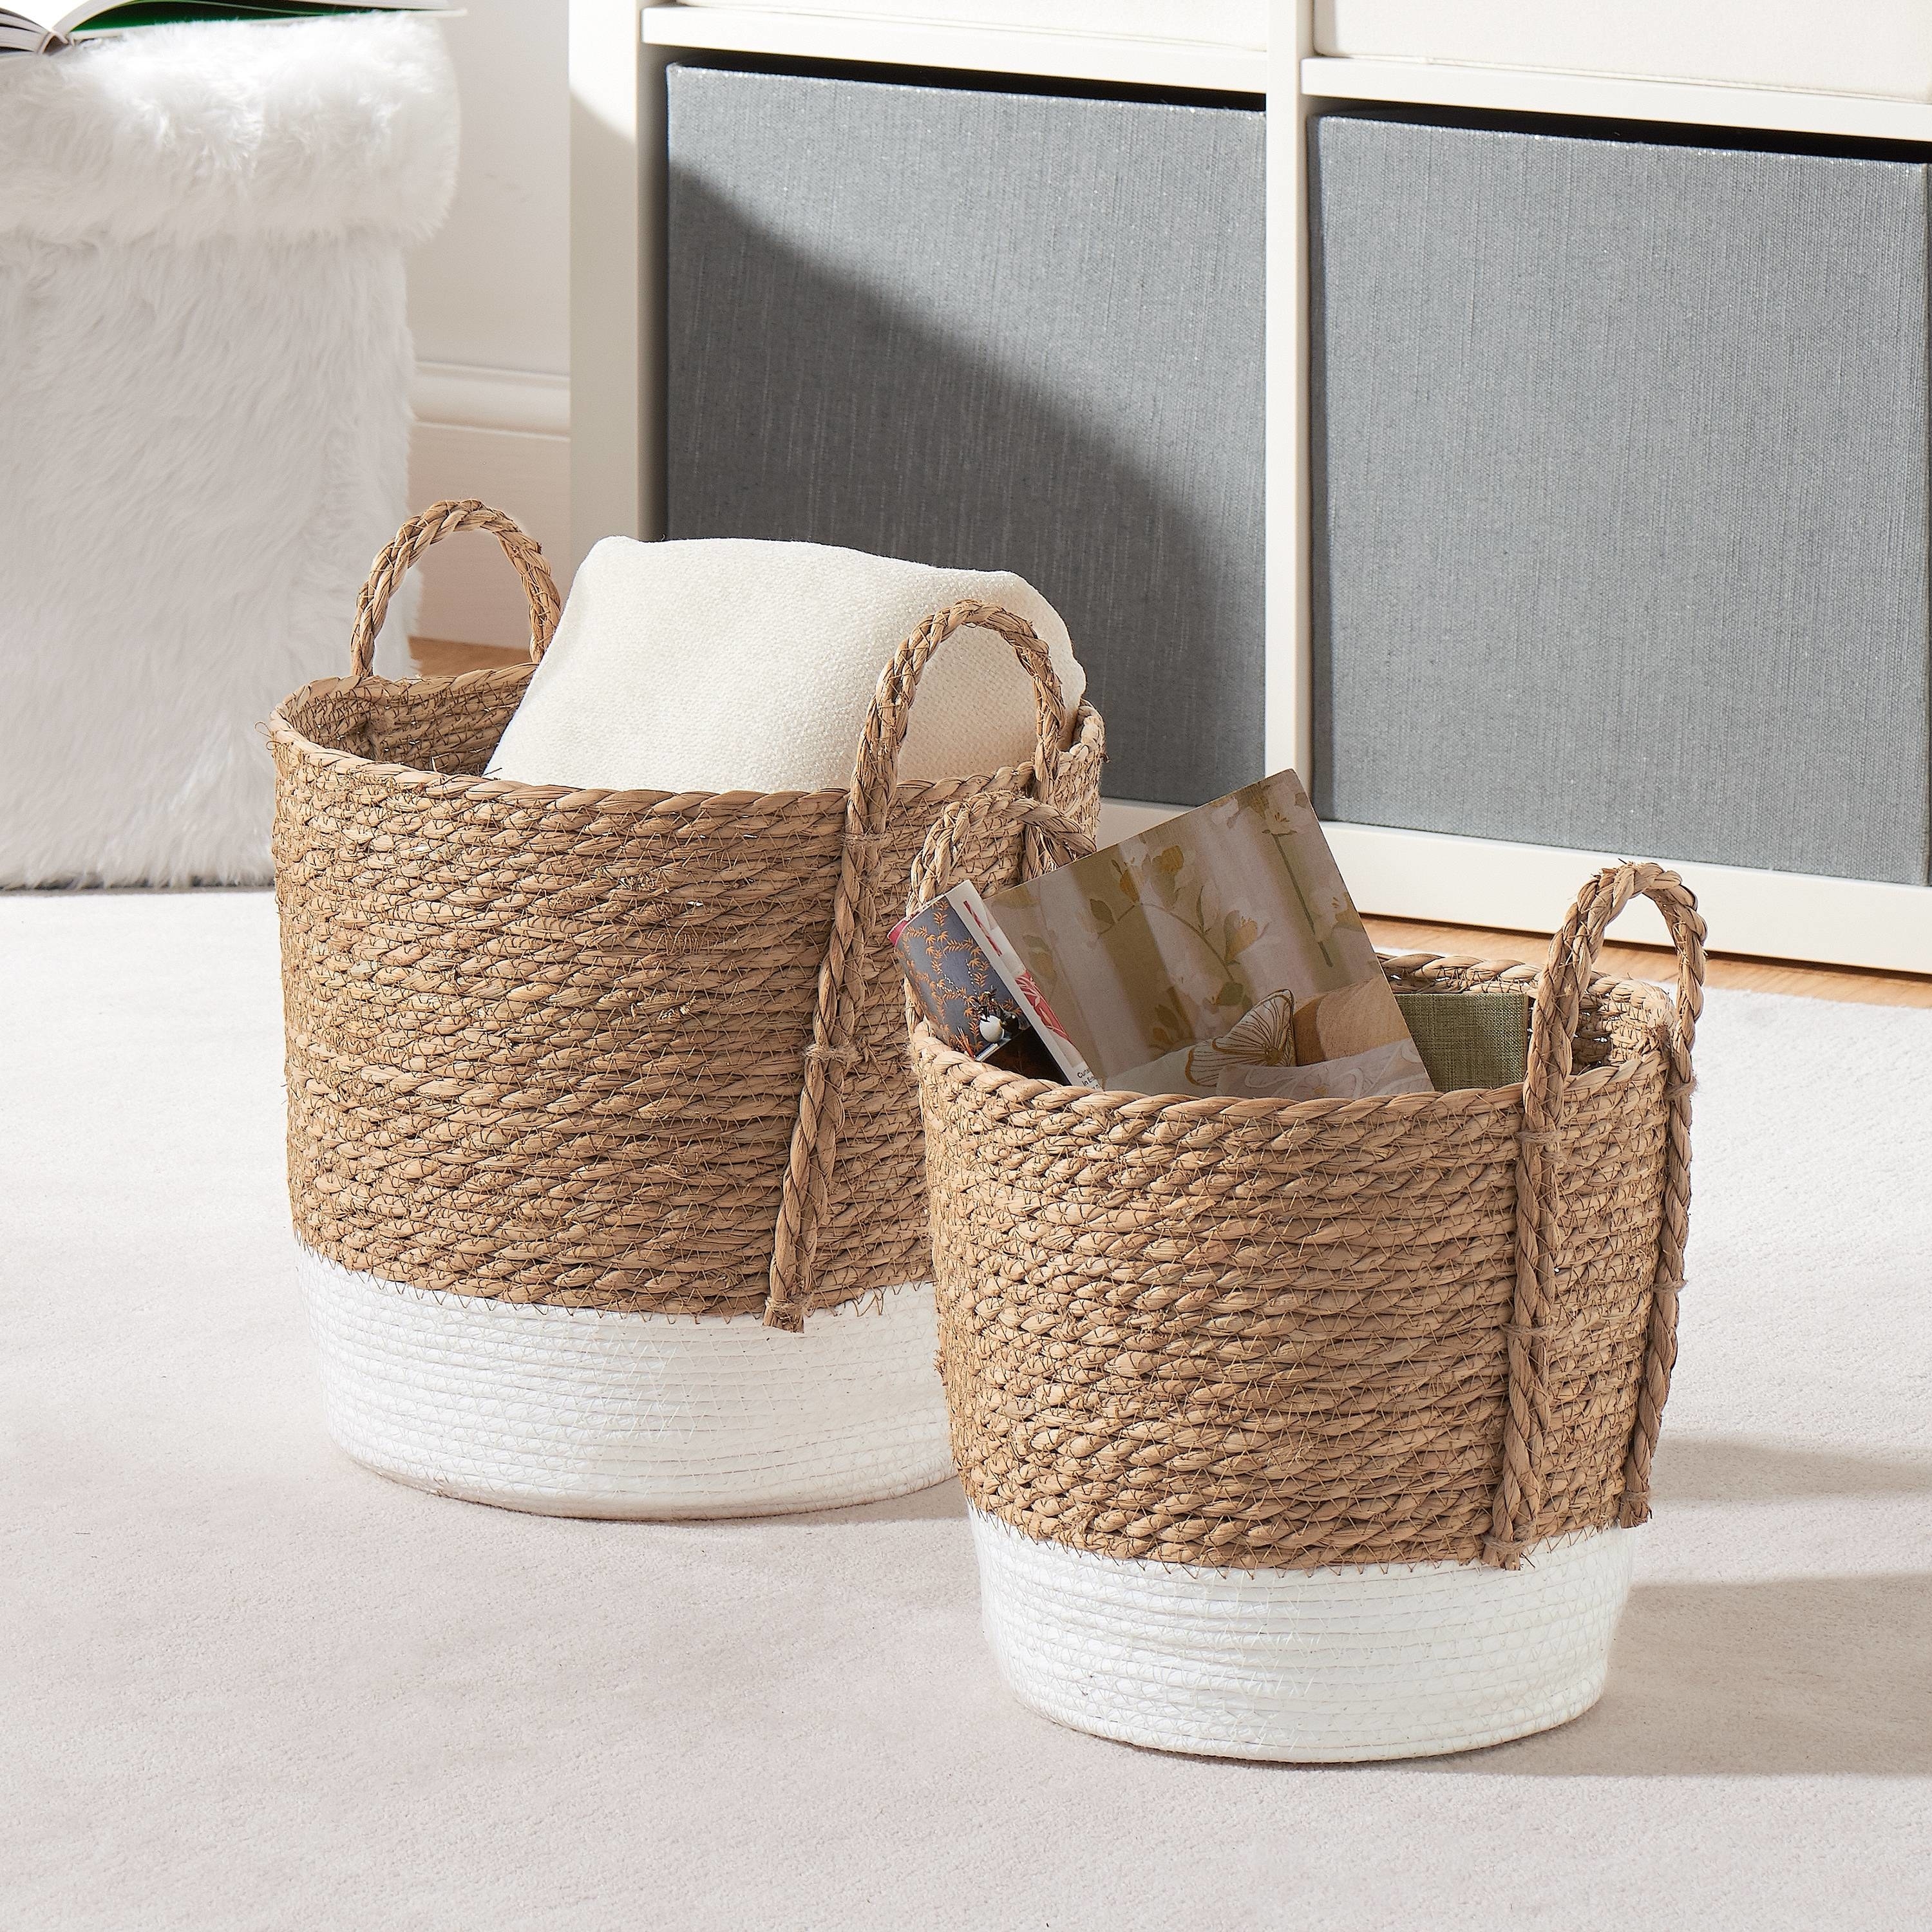 the basket set with blankets and magazines